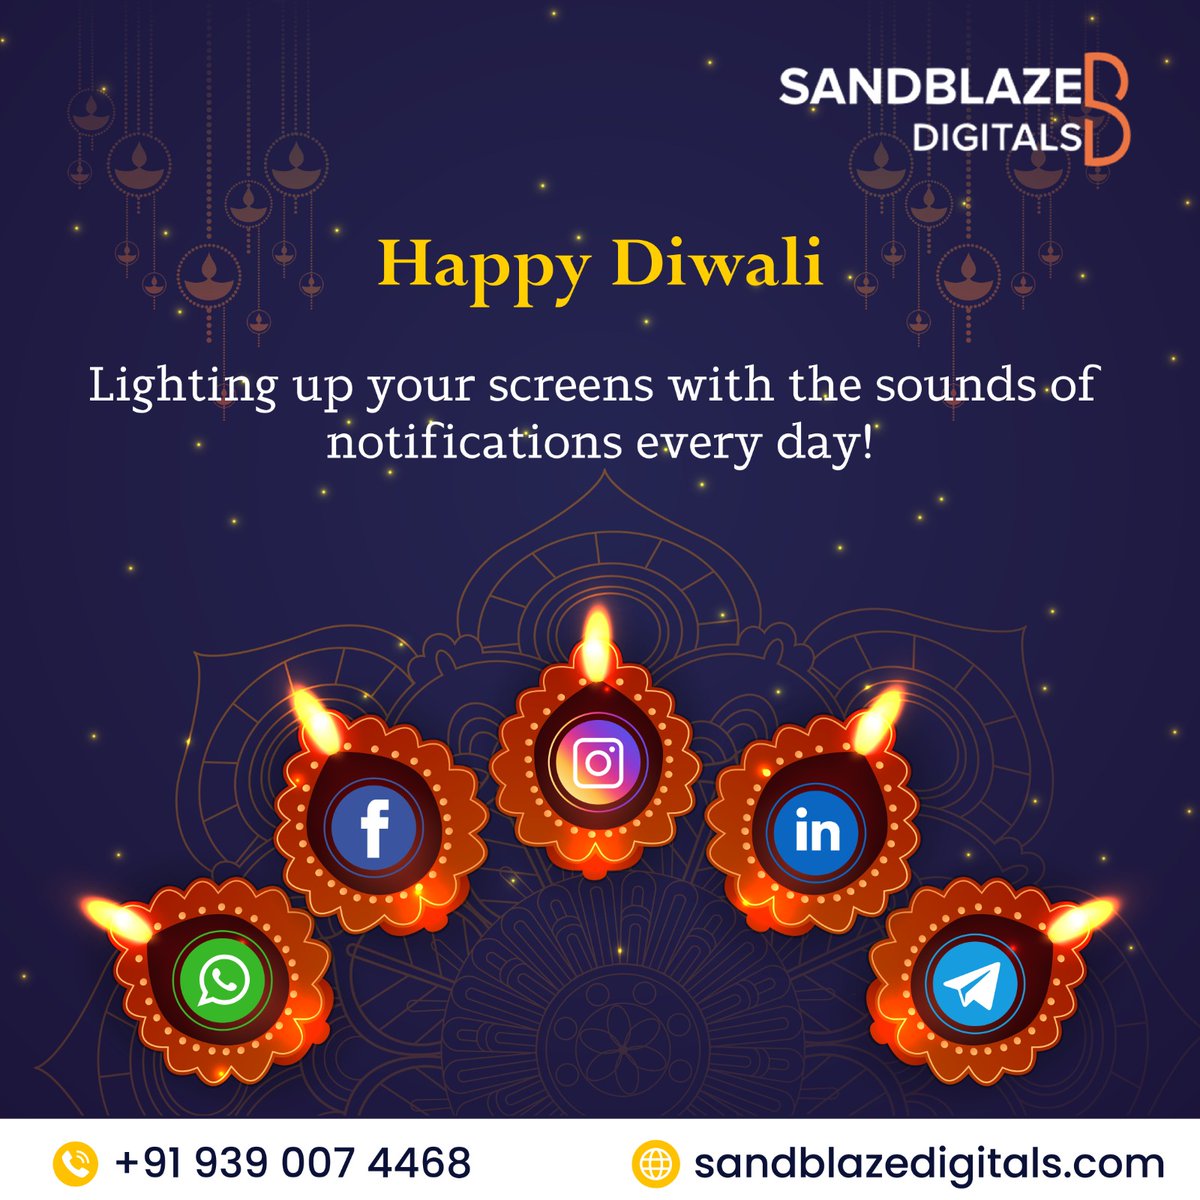 ✨ Celebrate the Digital Glow this Diwali with Sandblaze Digitals 🪔
May your Diwali be as bright as the diya lamps and as cheerful as the notification pings on your devices. Wishing you a Happy Diwali filled with prosperity and success. 

#SandblazeDigitals #HappyDiwali #Success